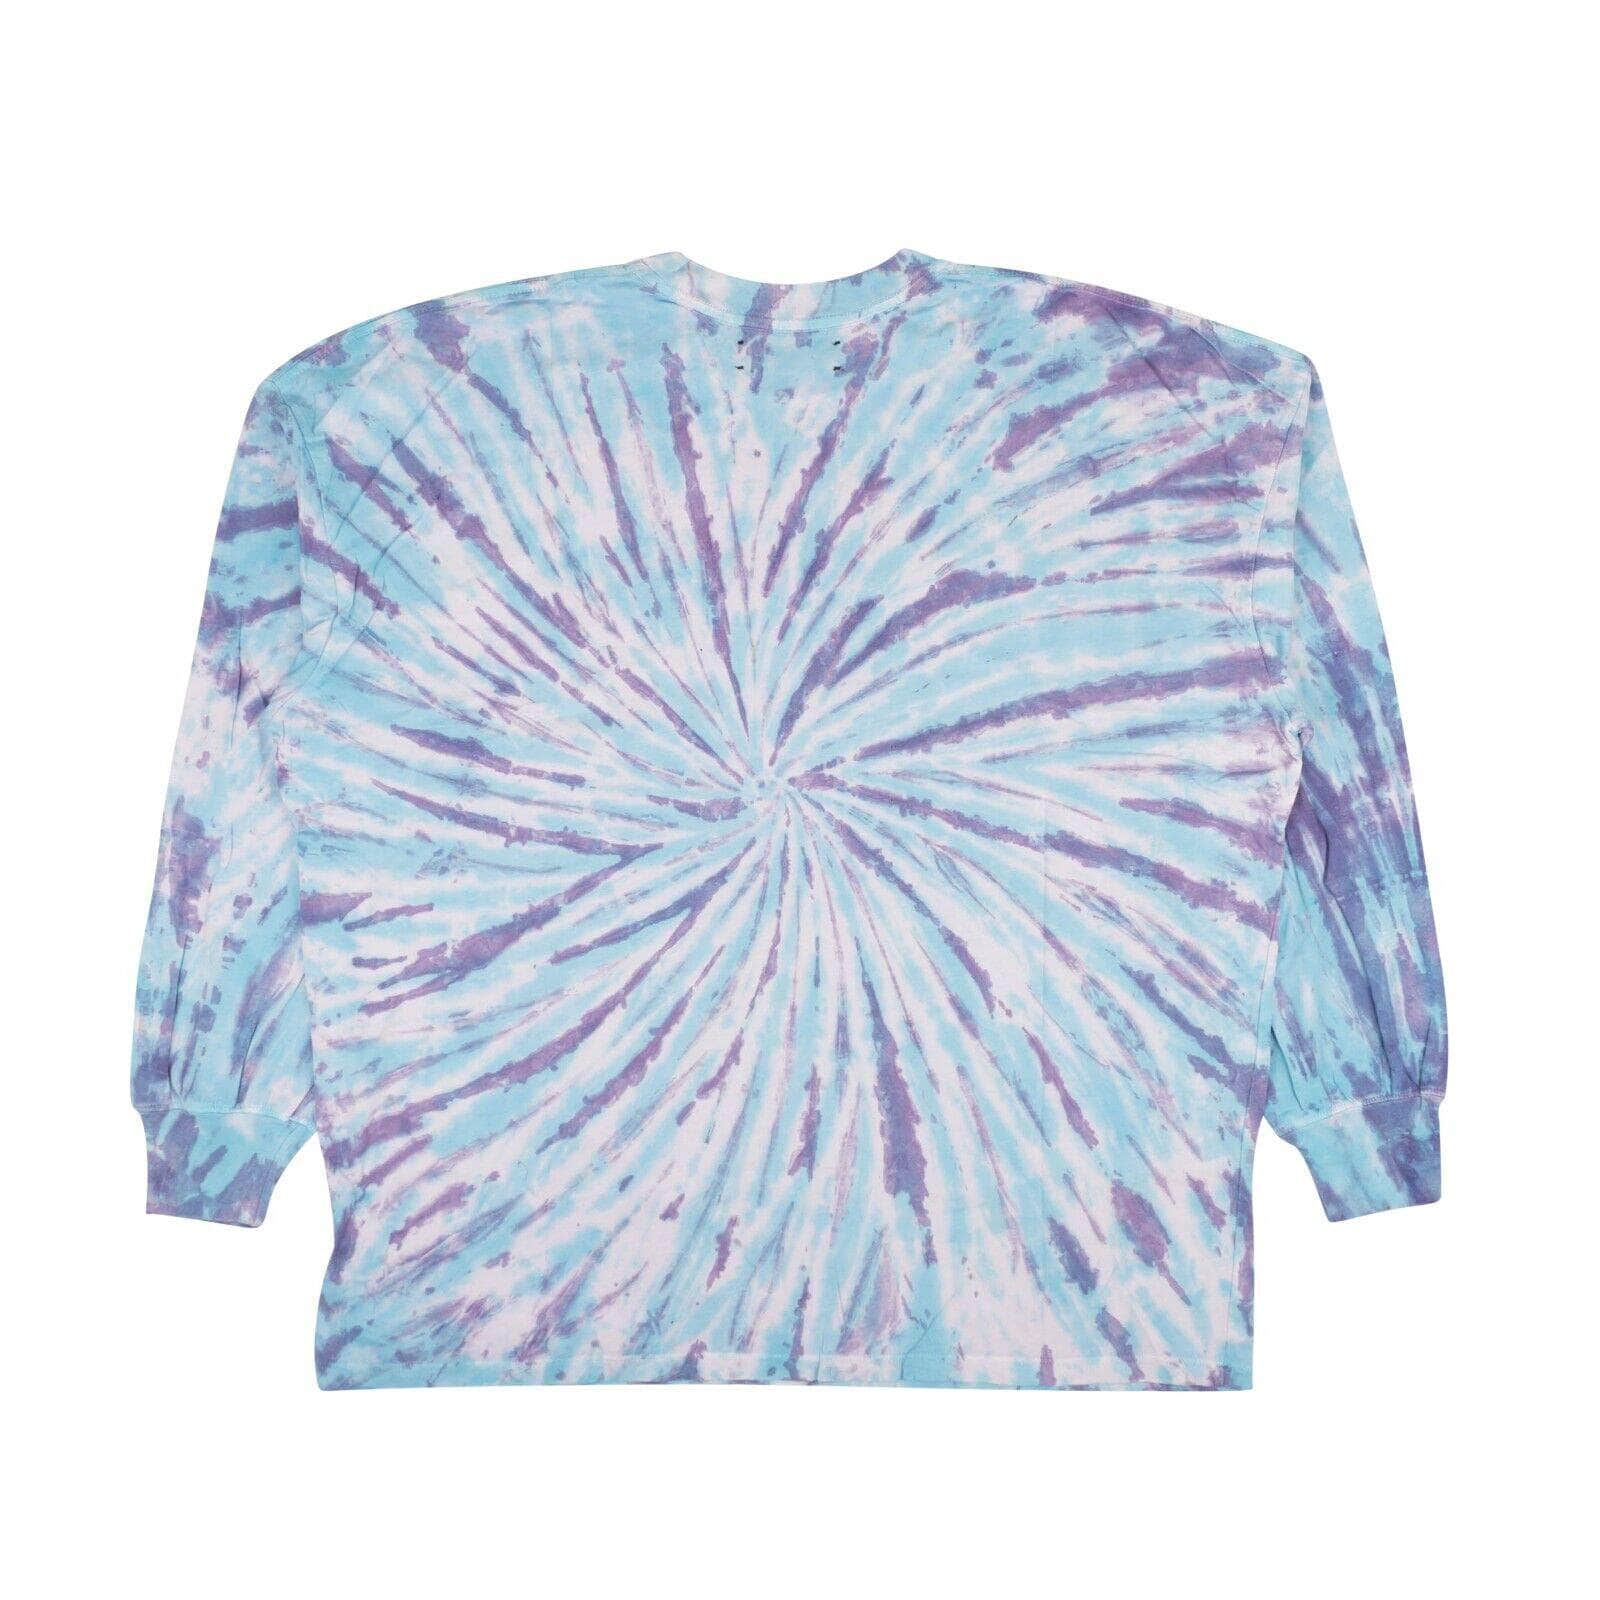 Amiri 250-500, amiri, channelenable-all, chicmi, couponcollection, gender-mens, main-clothing, mens-shoes, size-xs XS Blue And Purple Tie Dye Oversized Long Sleeve T-Shirt 95-AMR-1299/XS 95-AMR-1299/XS